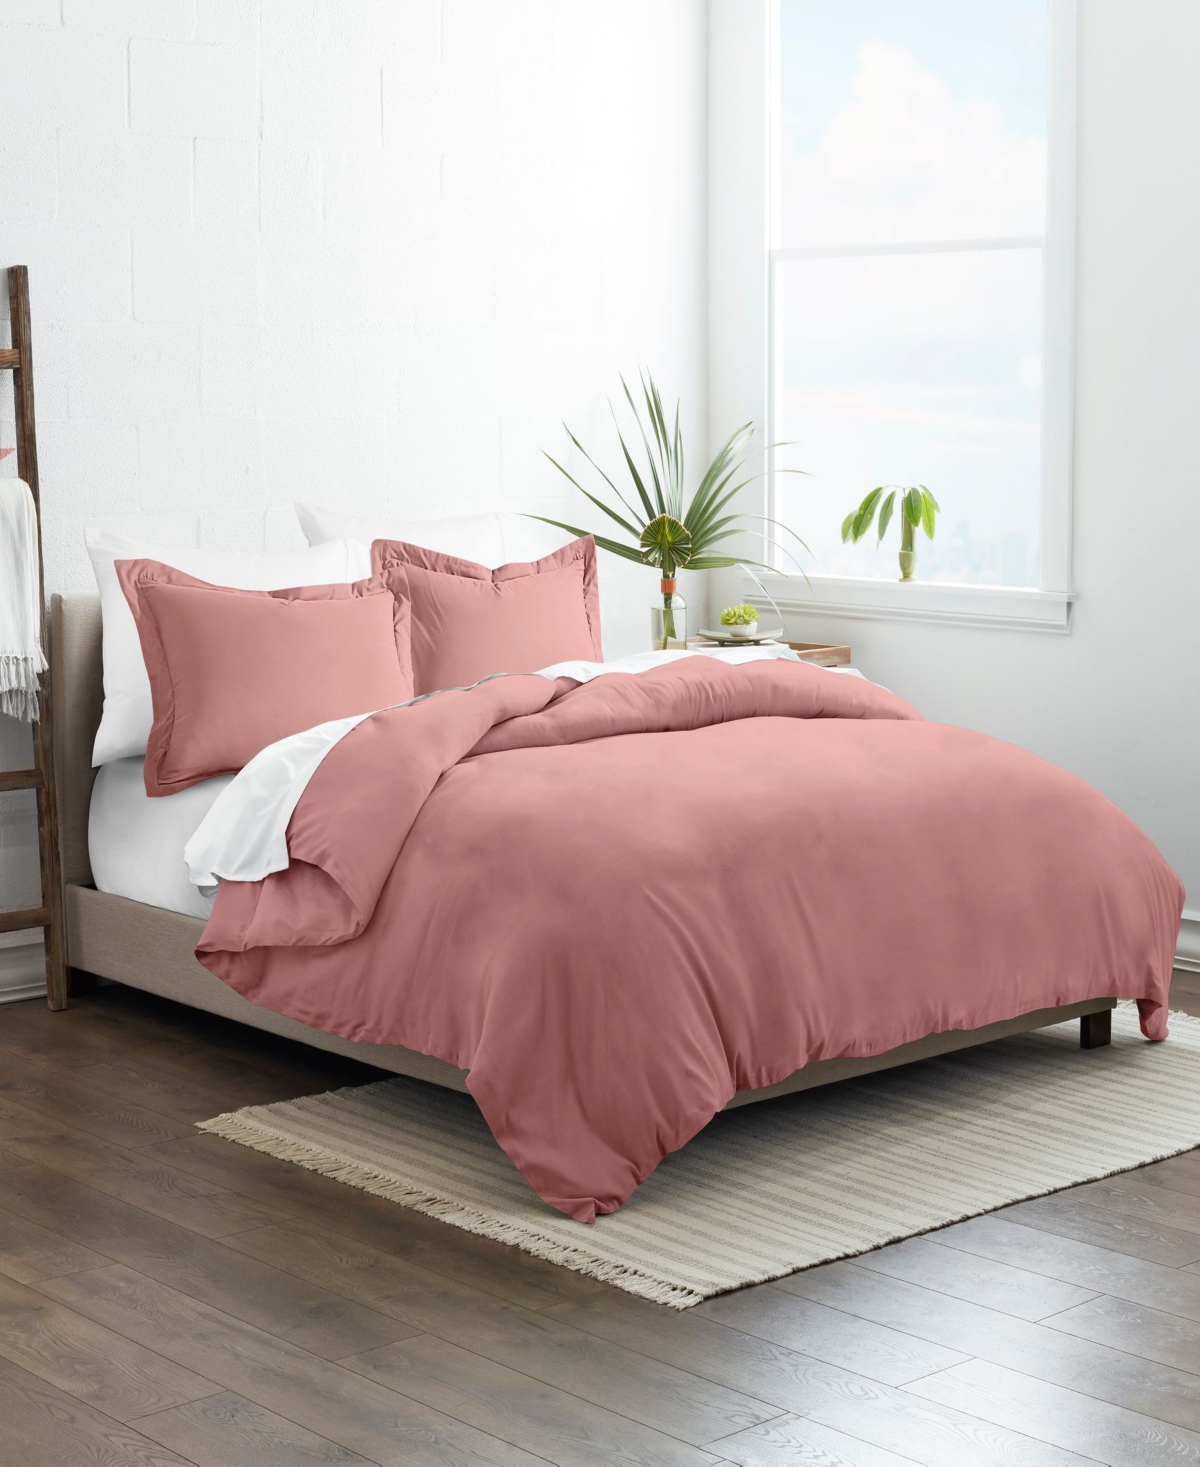 Ienjoy Home Dynamically Dashing Duvet Cover Set By The Home Collection, Twin/twin Xl In Clay